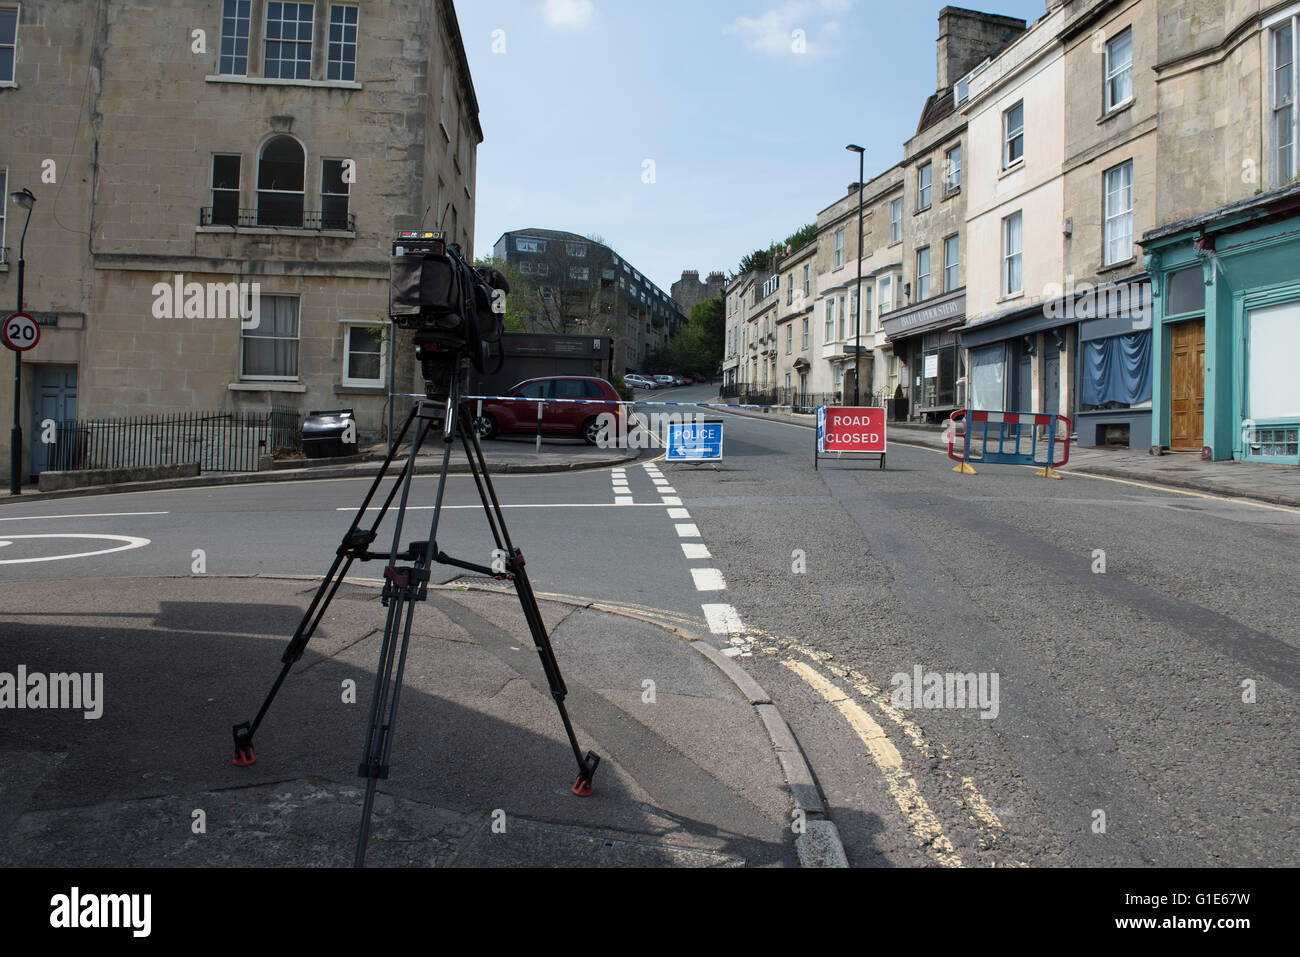 An unexploded World War II bomb was found at a school in Bath. The army arrived to remove it from the site, and police evacuated people from the neighbourhood. Stock Photo